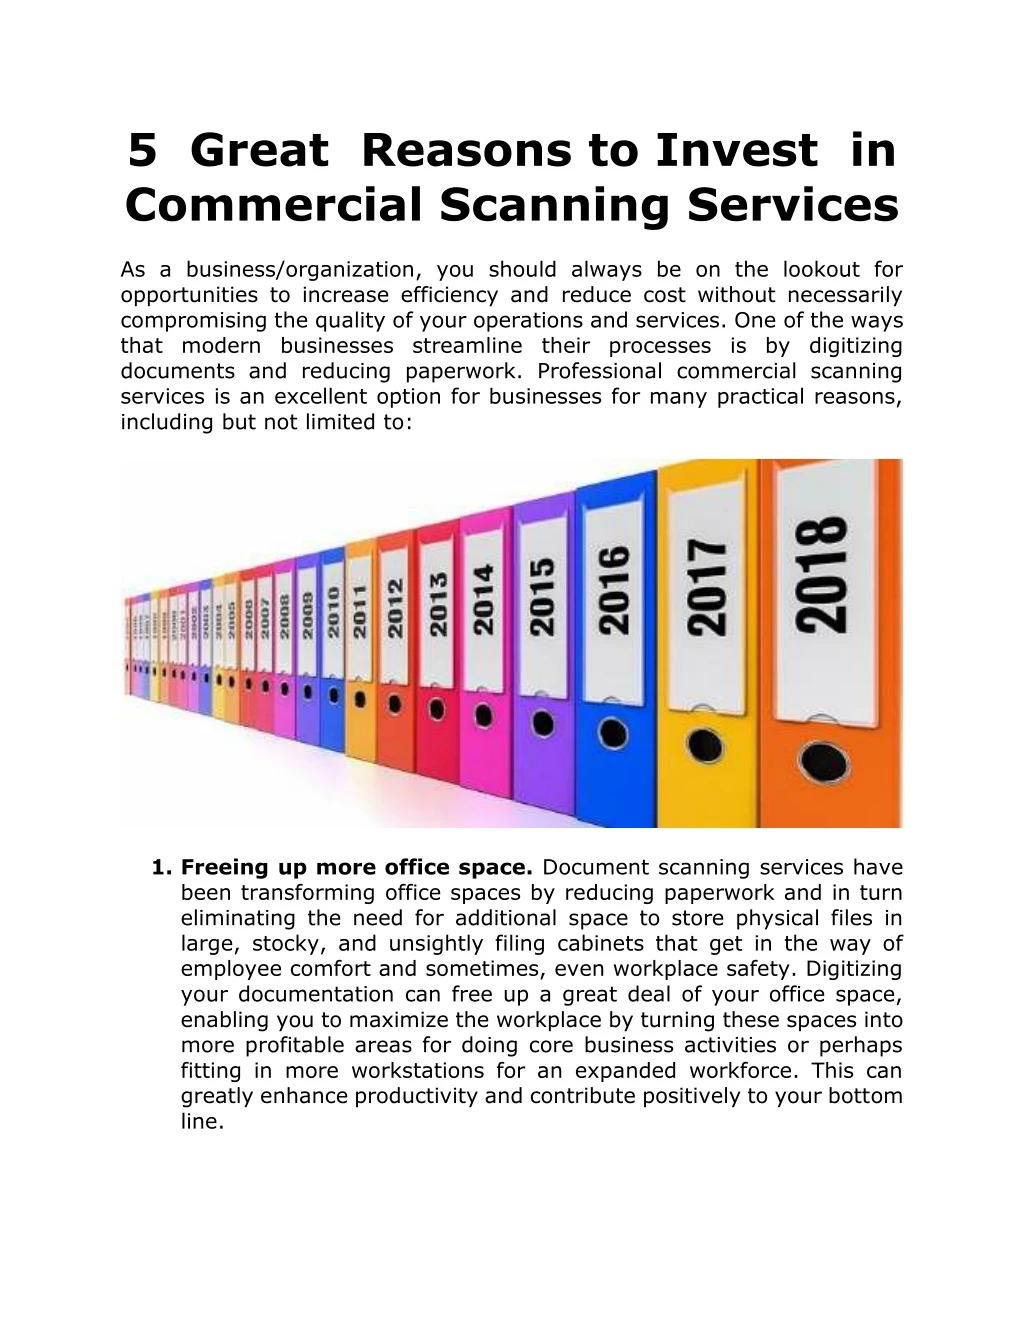 5 great reasons to invest in commercial scanning